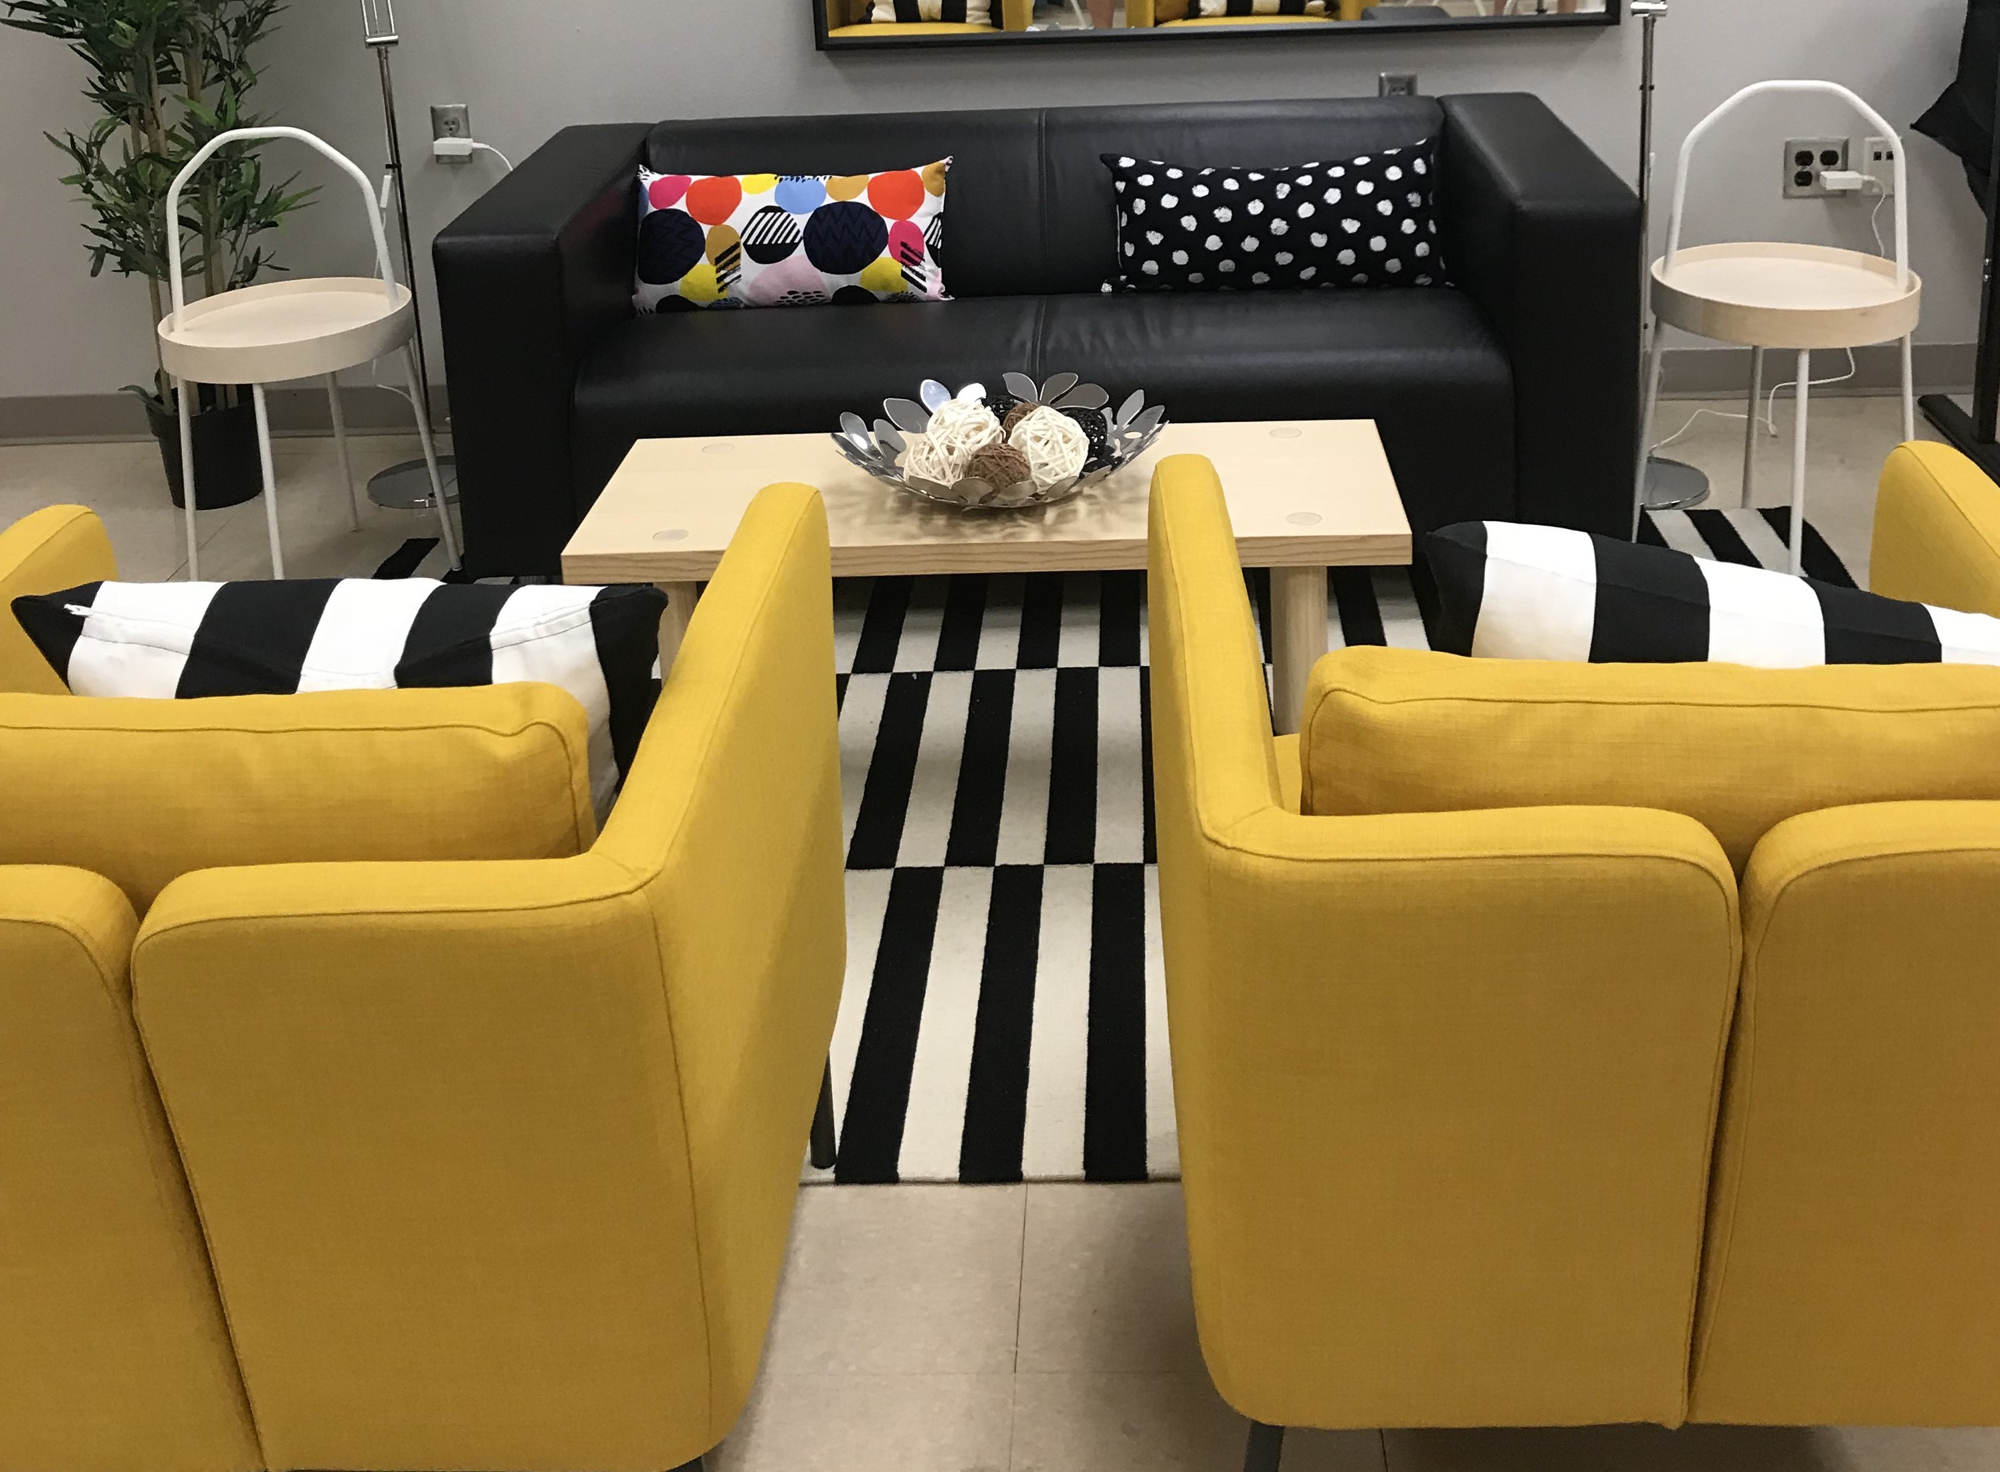 IKEA donated furniture for the Bridgewater Middle School teacher lounge makeover.